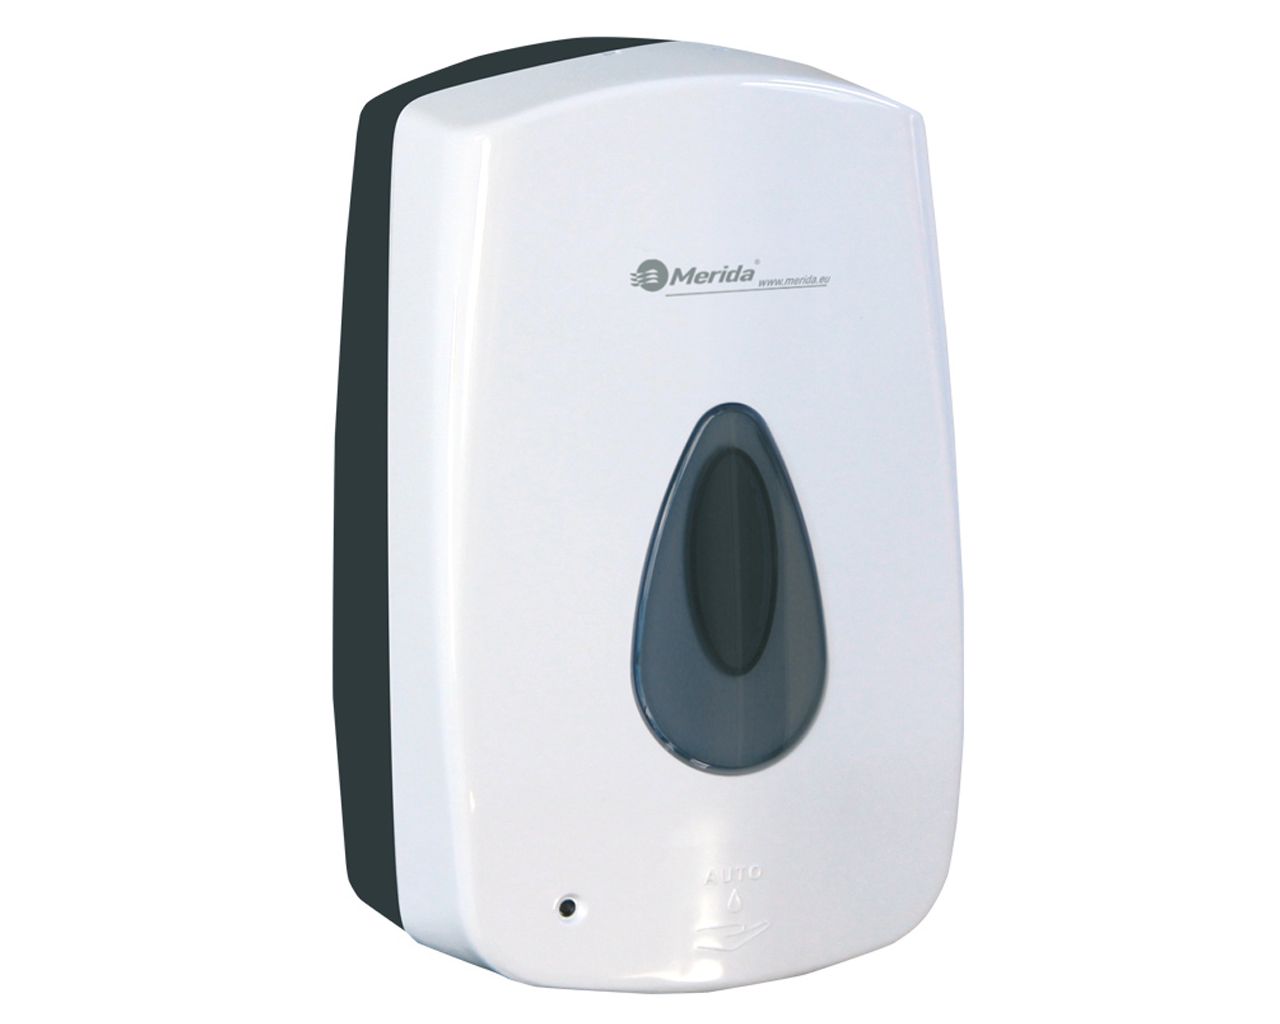 MERIDA TOP AUTOMATIC foam soap dispenser, white with grey back plate, grey sight window